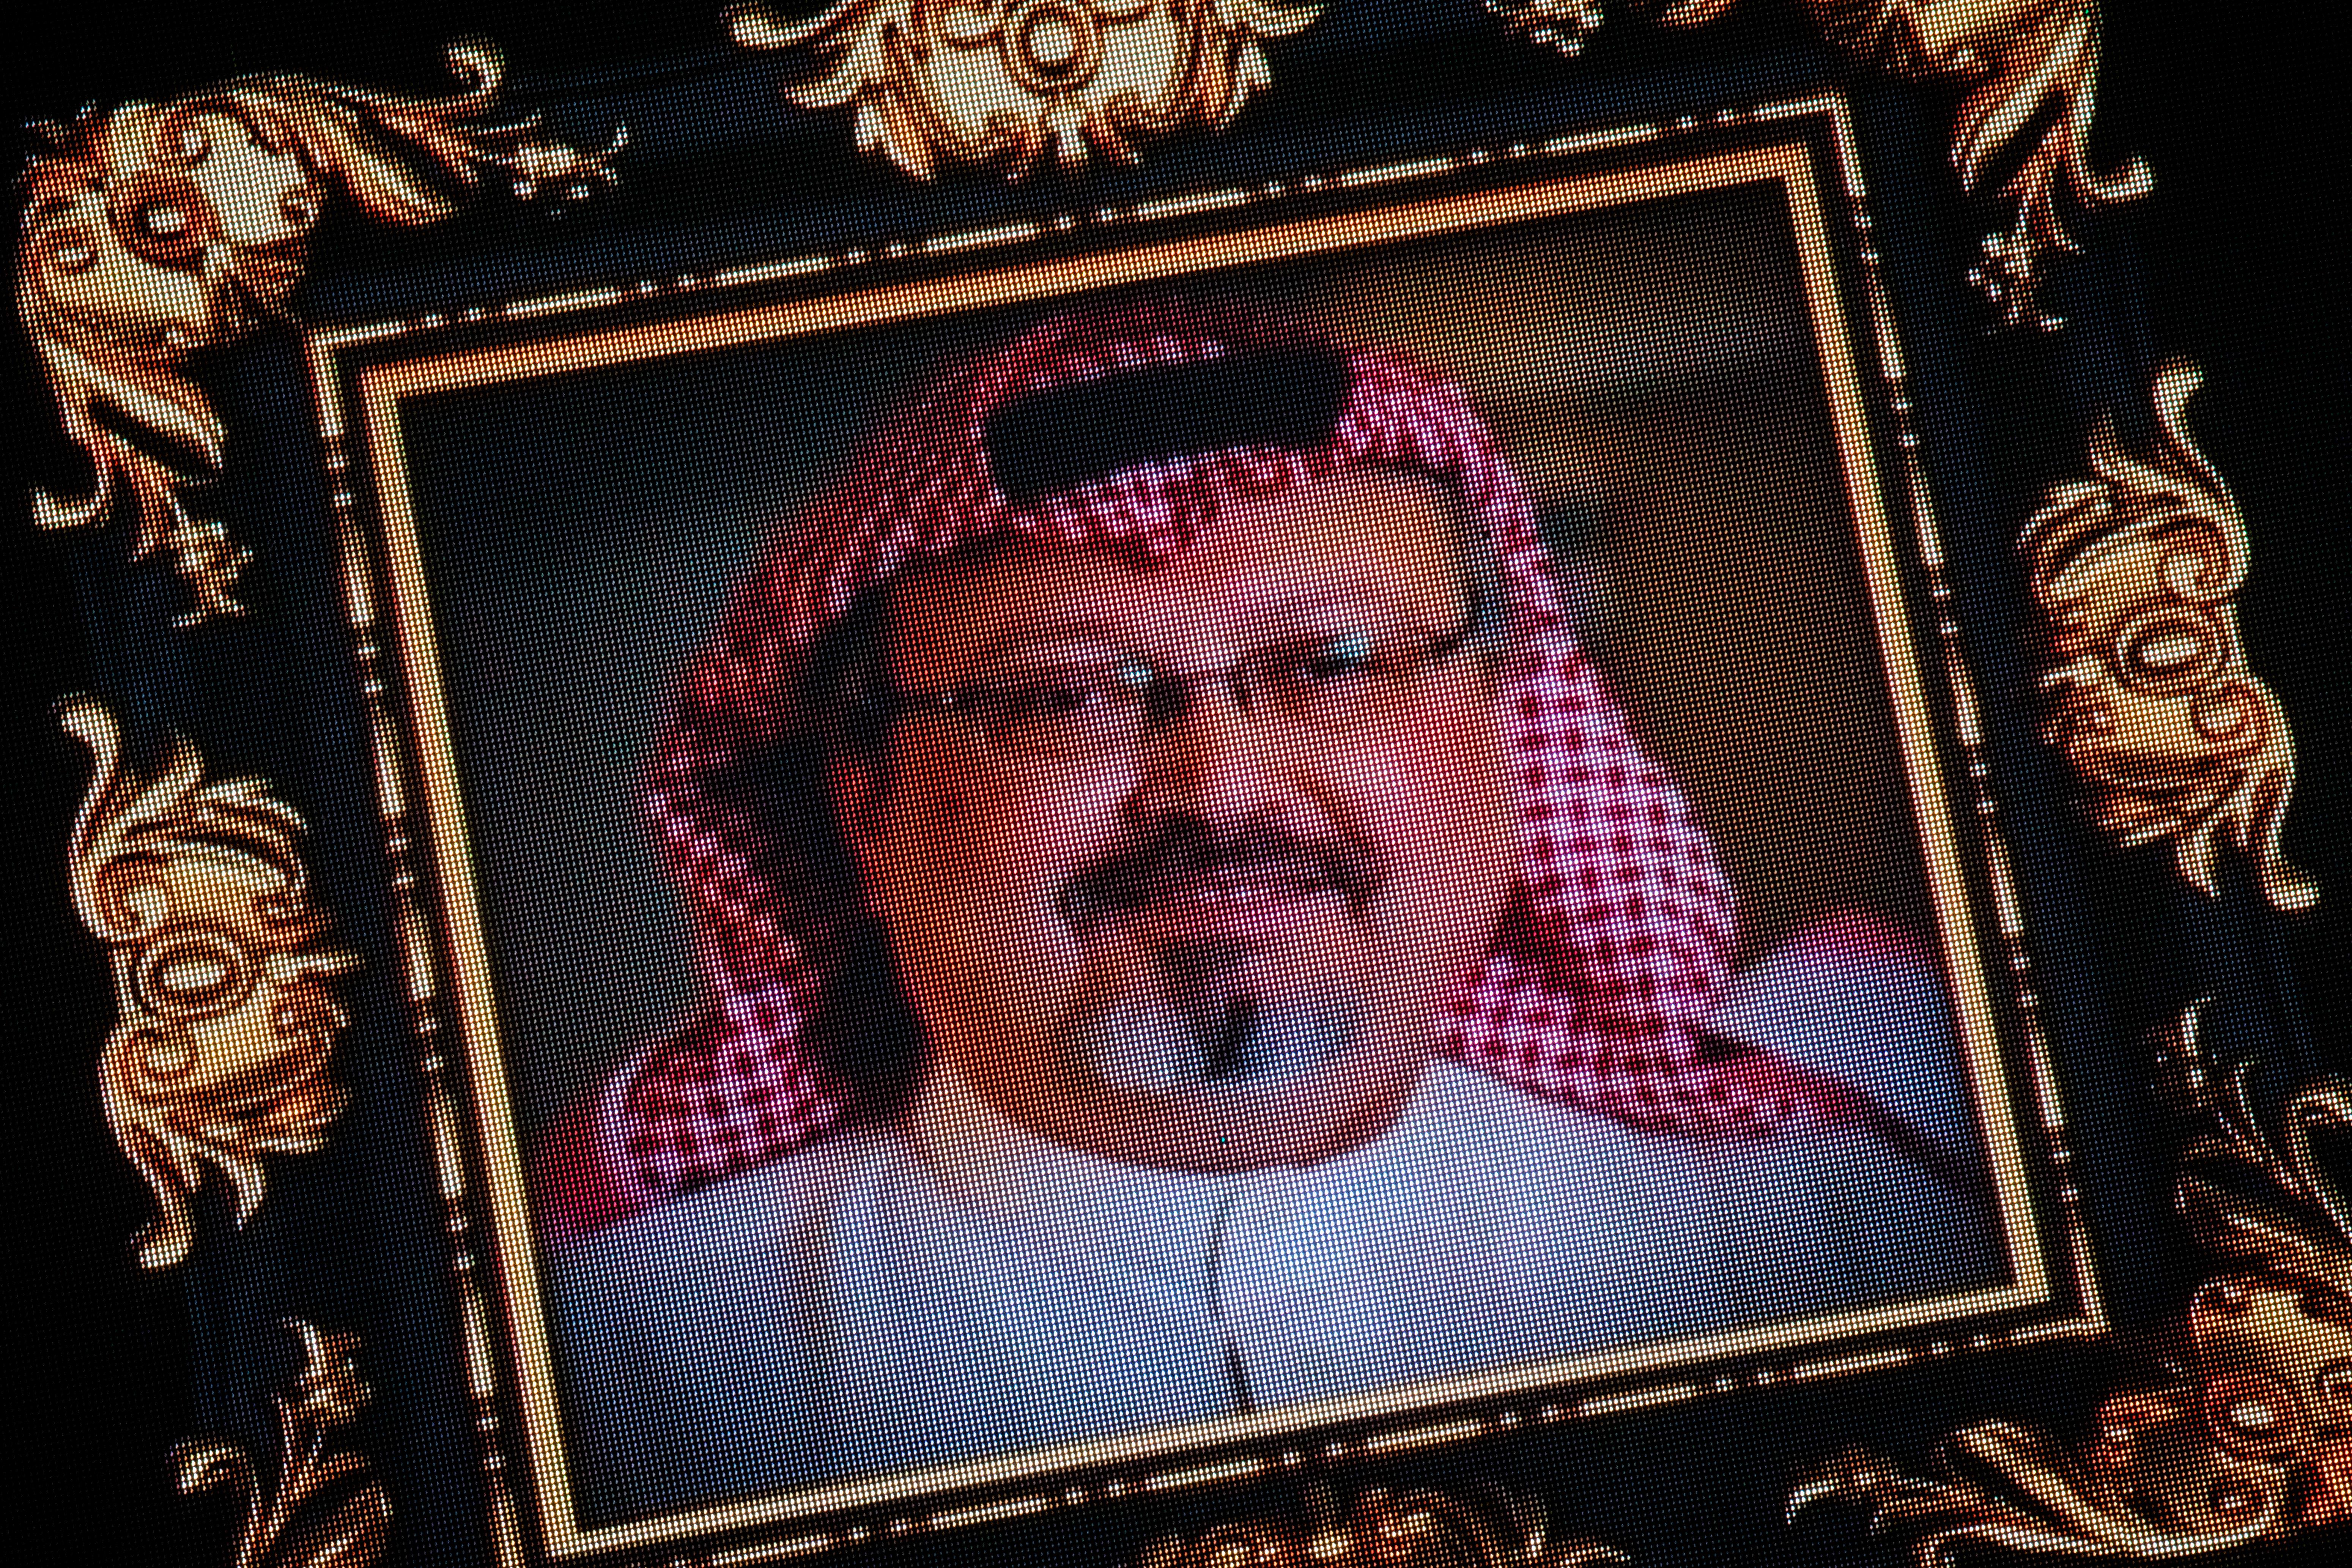 Images of murdered journalist Jamal Khashoggi are seen on a big screen during a commemorative ceremony held on November 11, 2018 in Istanbul Turkey.